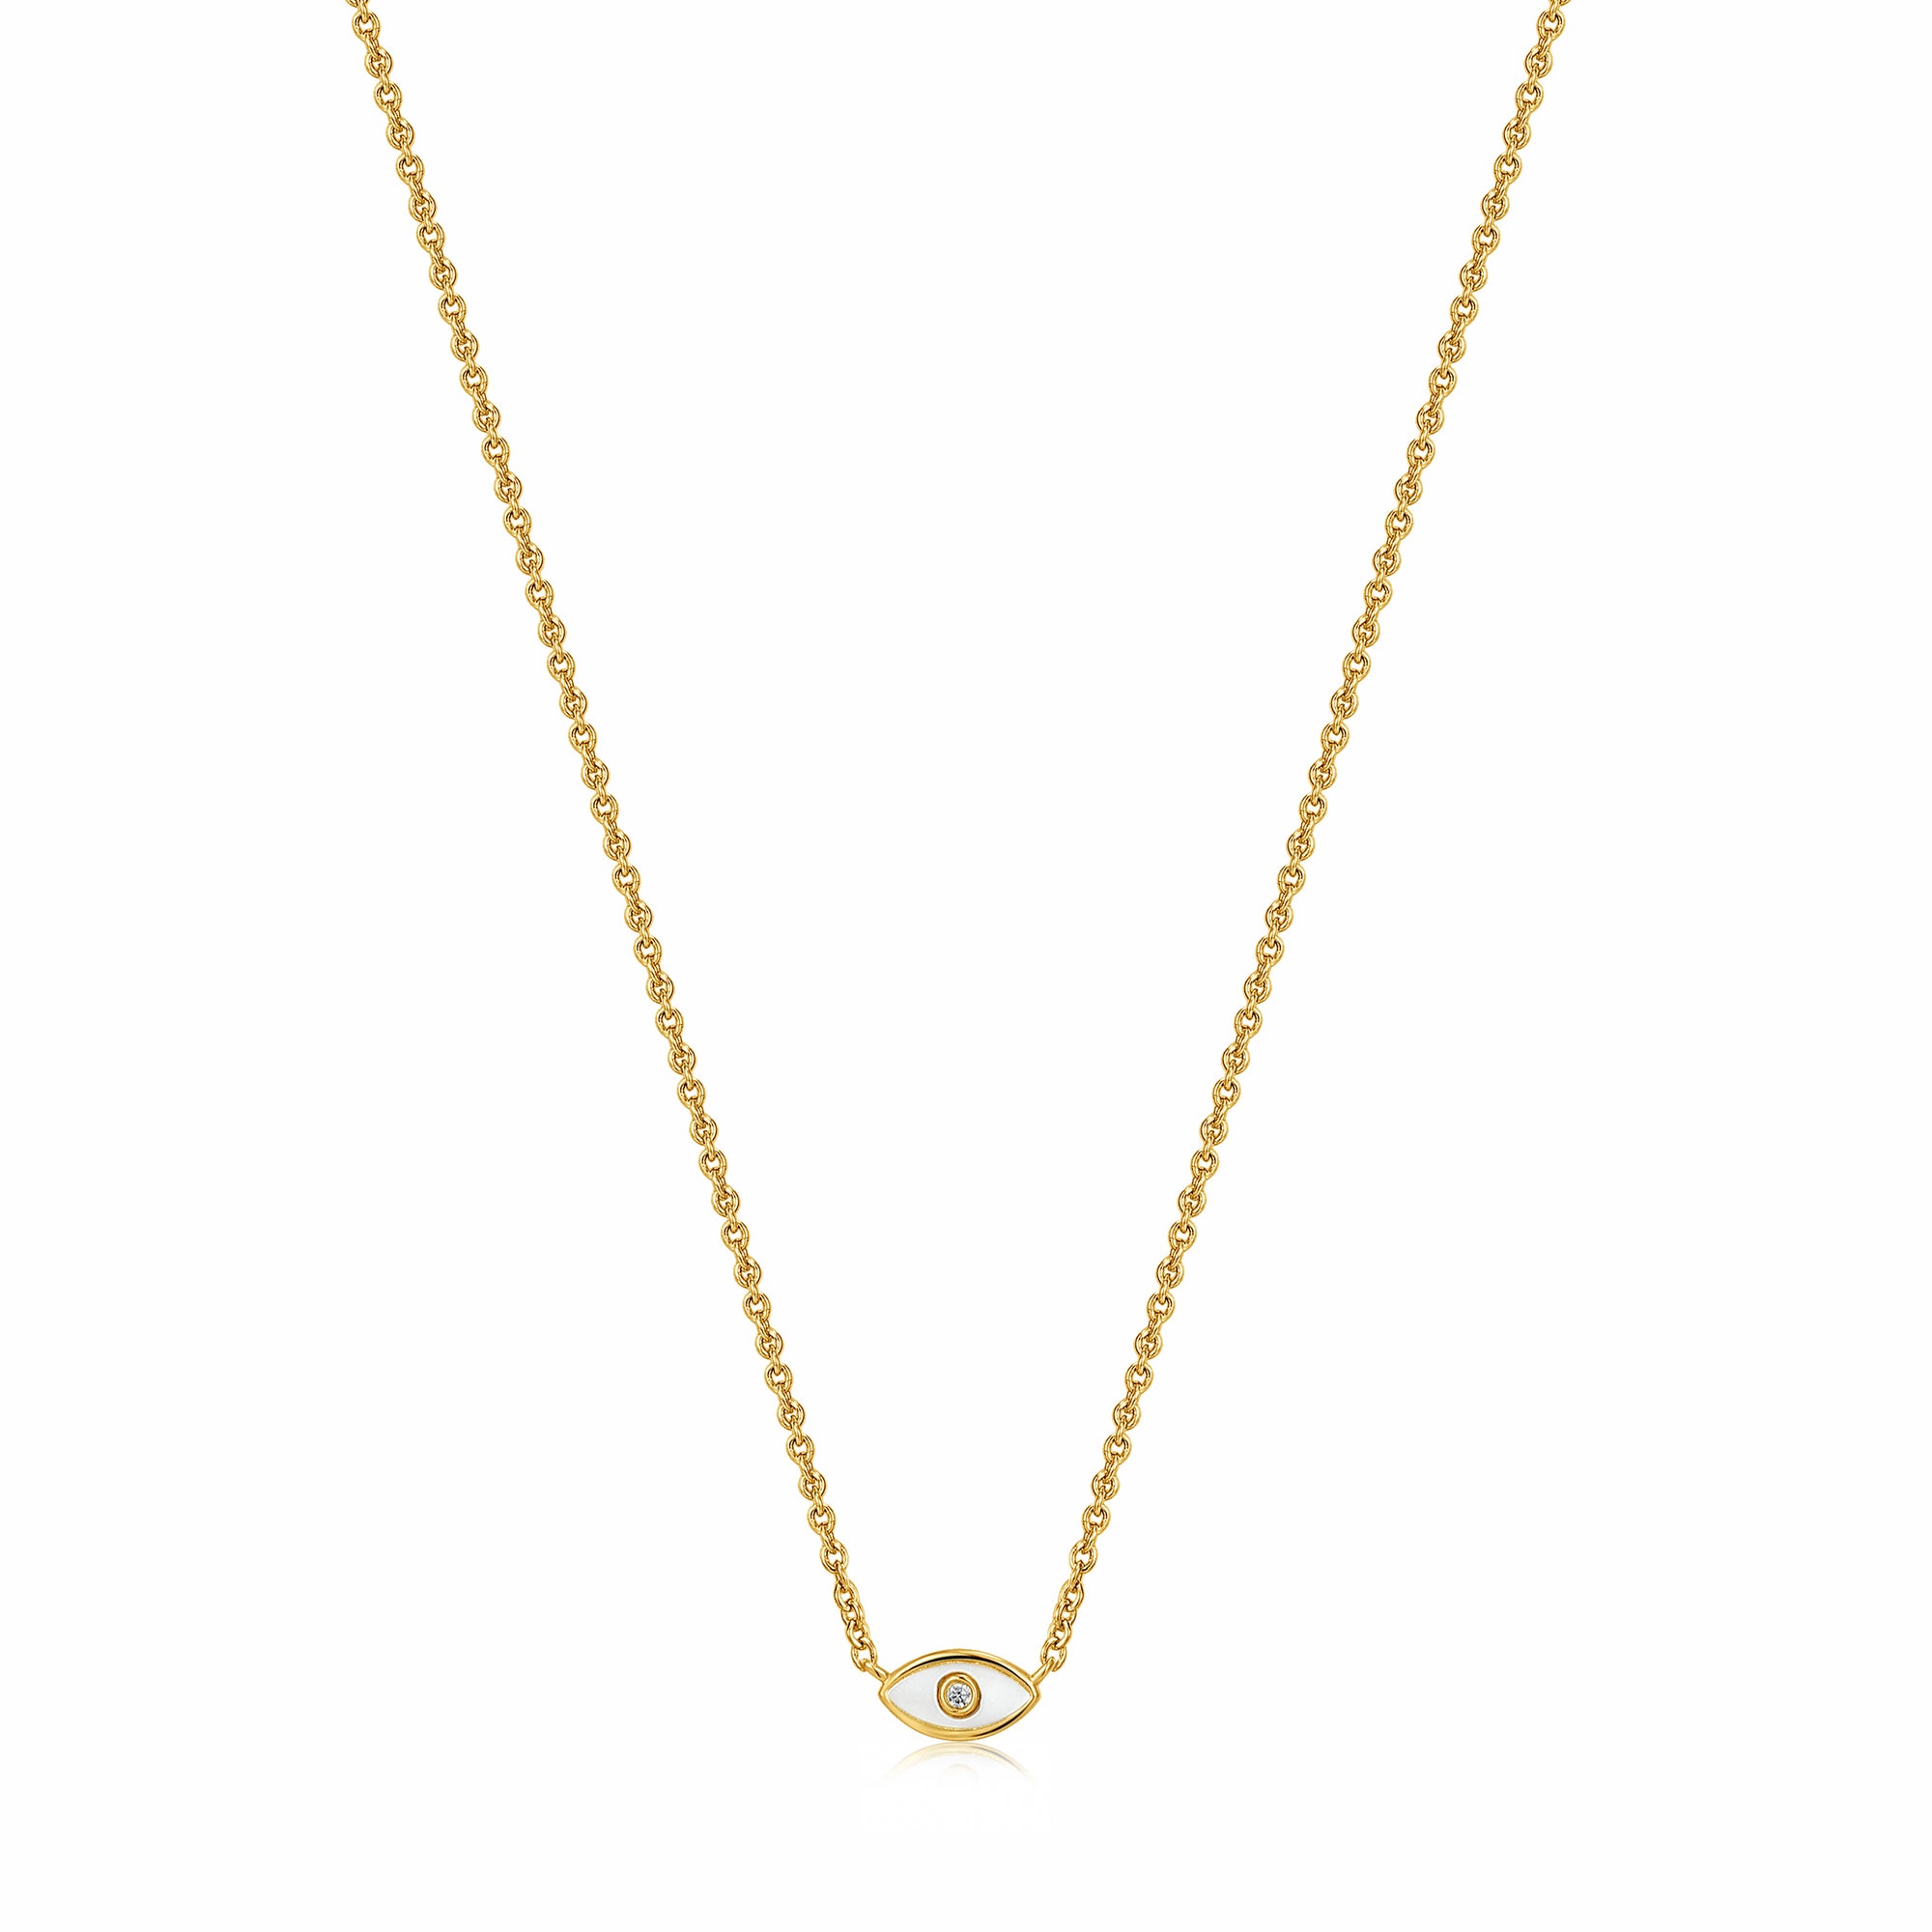 ANIA HAIE ANIA HAIE - Evil Eye Gold Necklace available at The Good Life Boutique